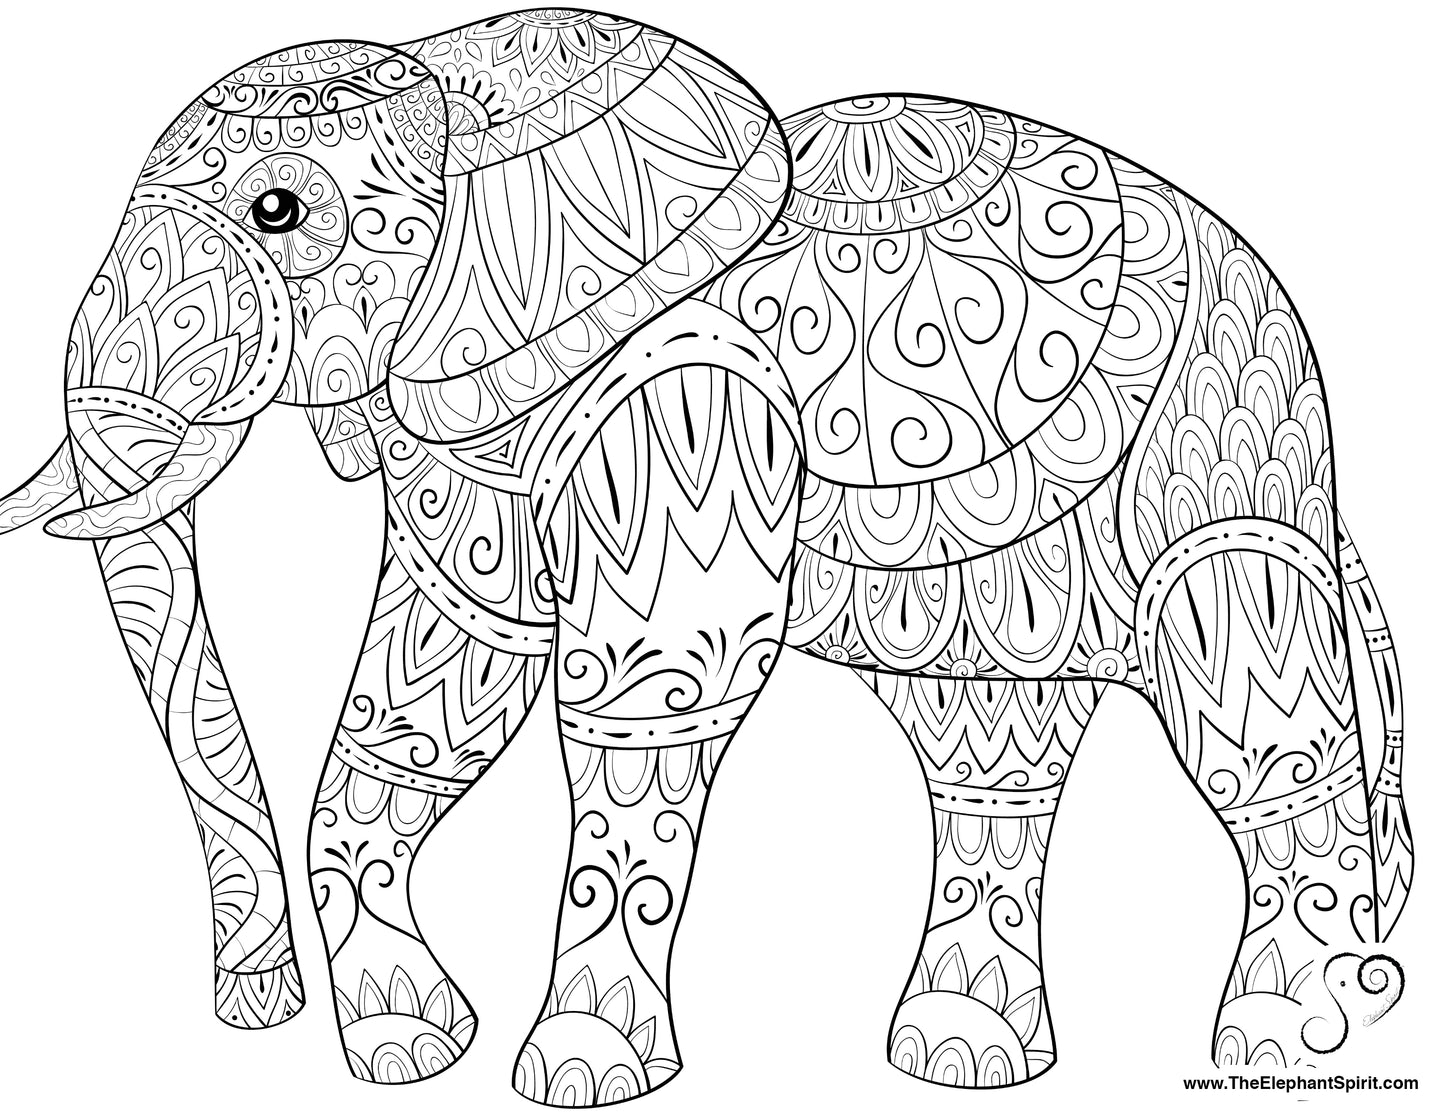 FREE Coloring Page 11-10